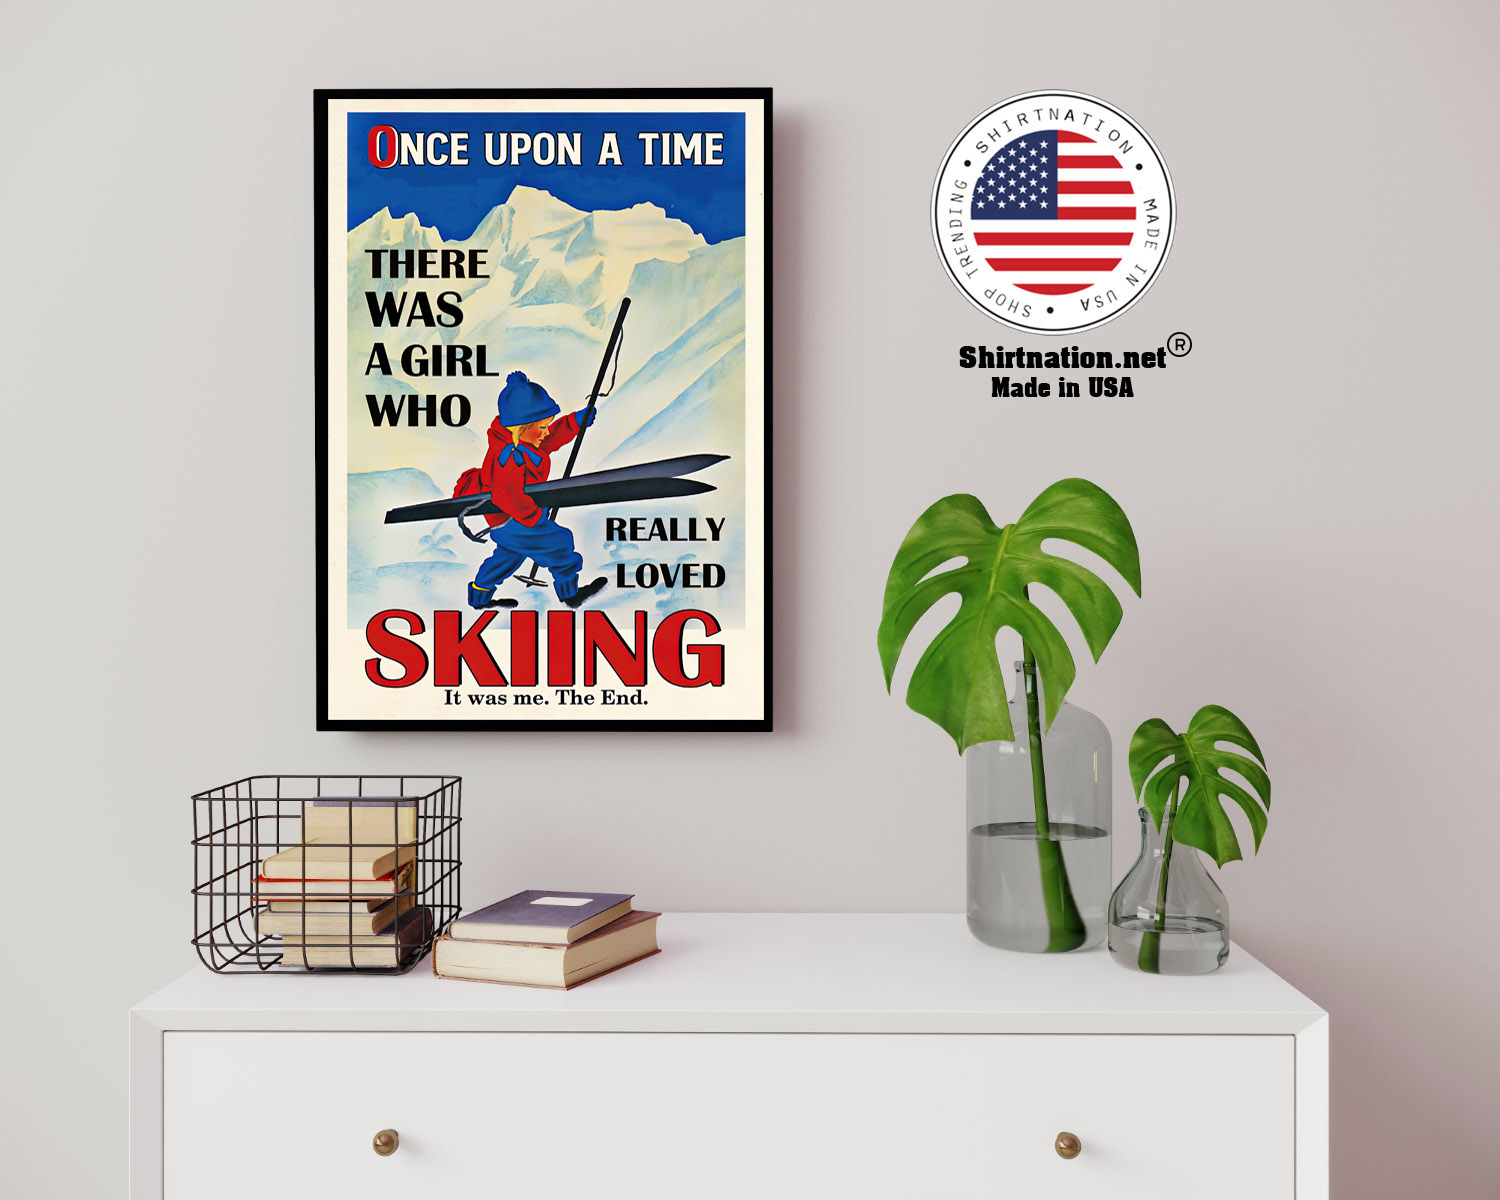 Once upon a time there was a girl who really loved skiing poster 14